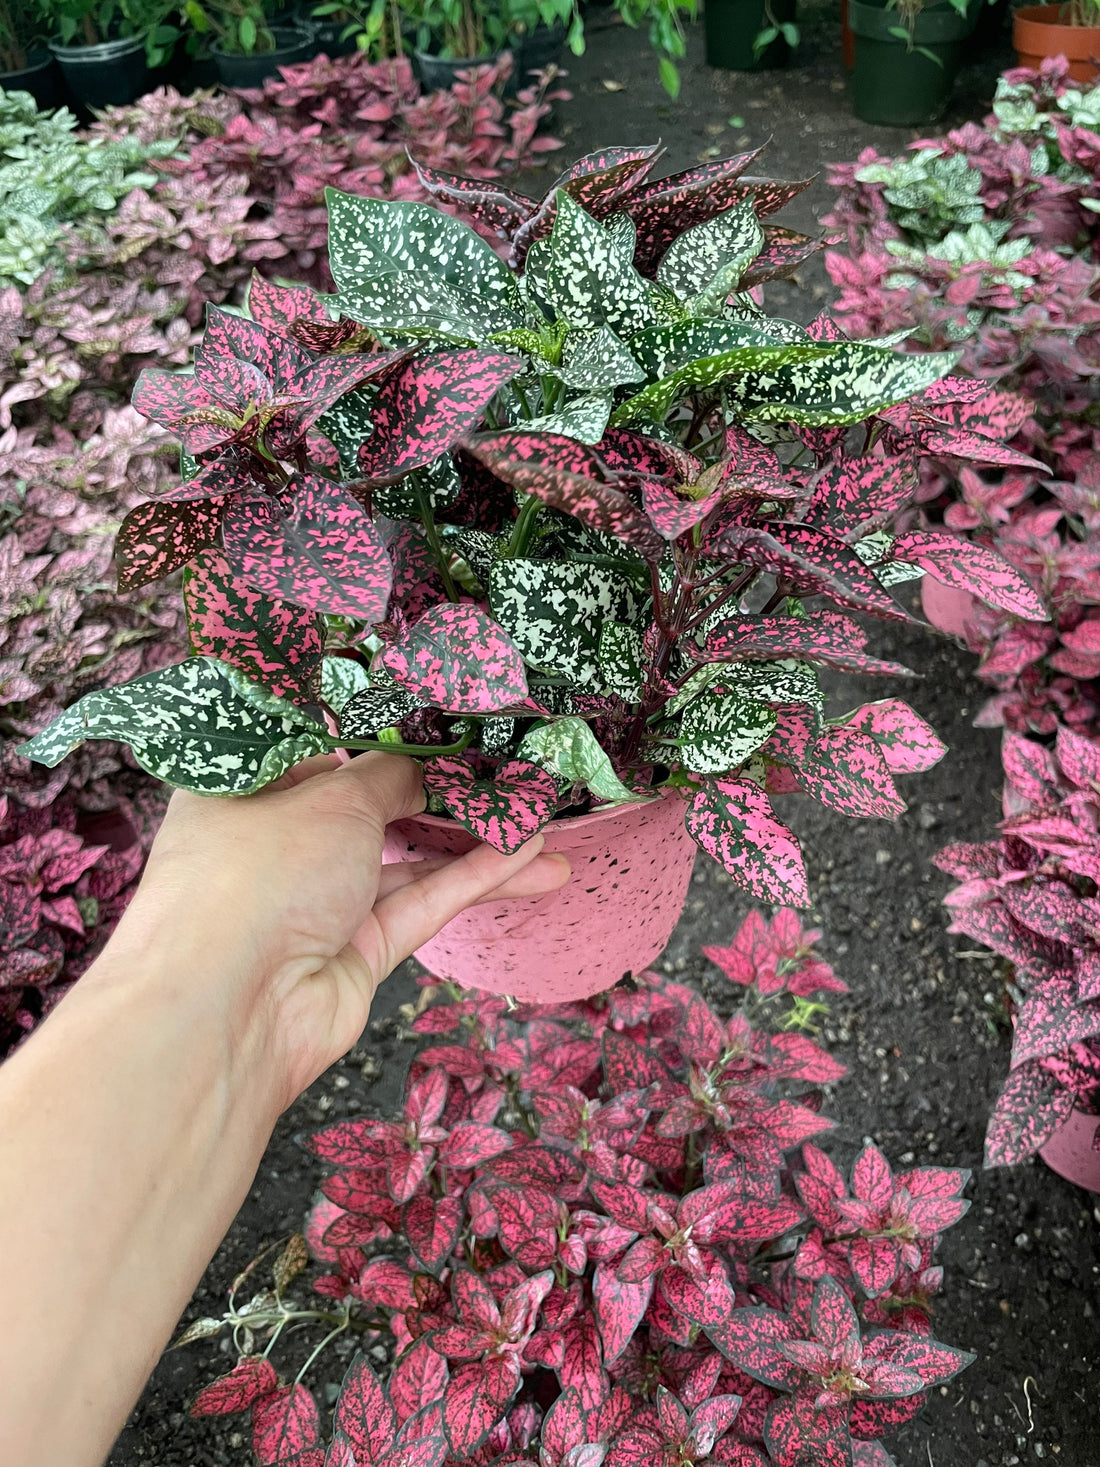 XL in 6 inch pot-polka dot plant live potted plant in growers pot- combo mixed color -similar to photo not exact-Hypoestes phyllostachya